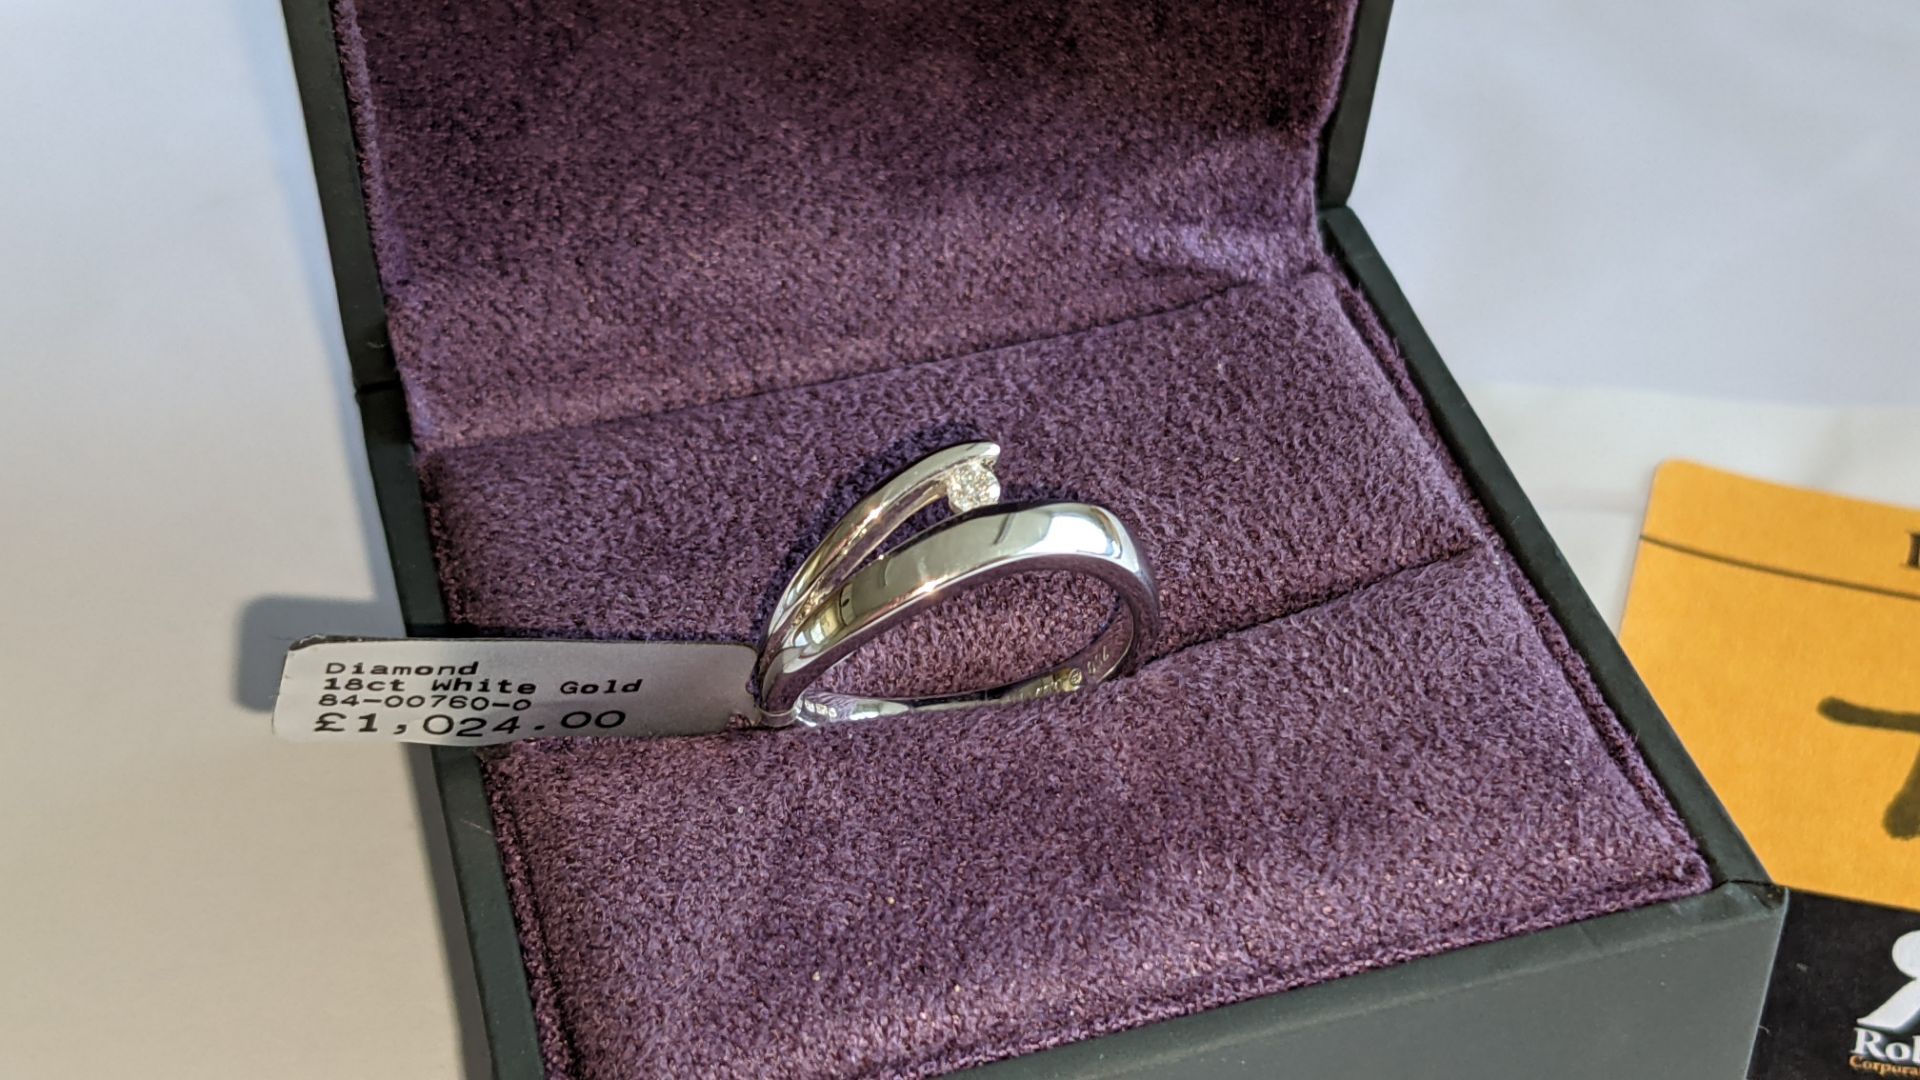 18ct white gold ring with central diamond weighing 0.07ct. RRP £1,024 - Image 2 of 12